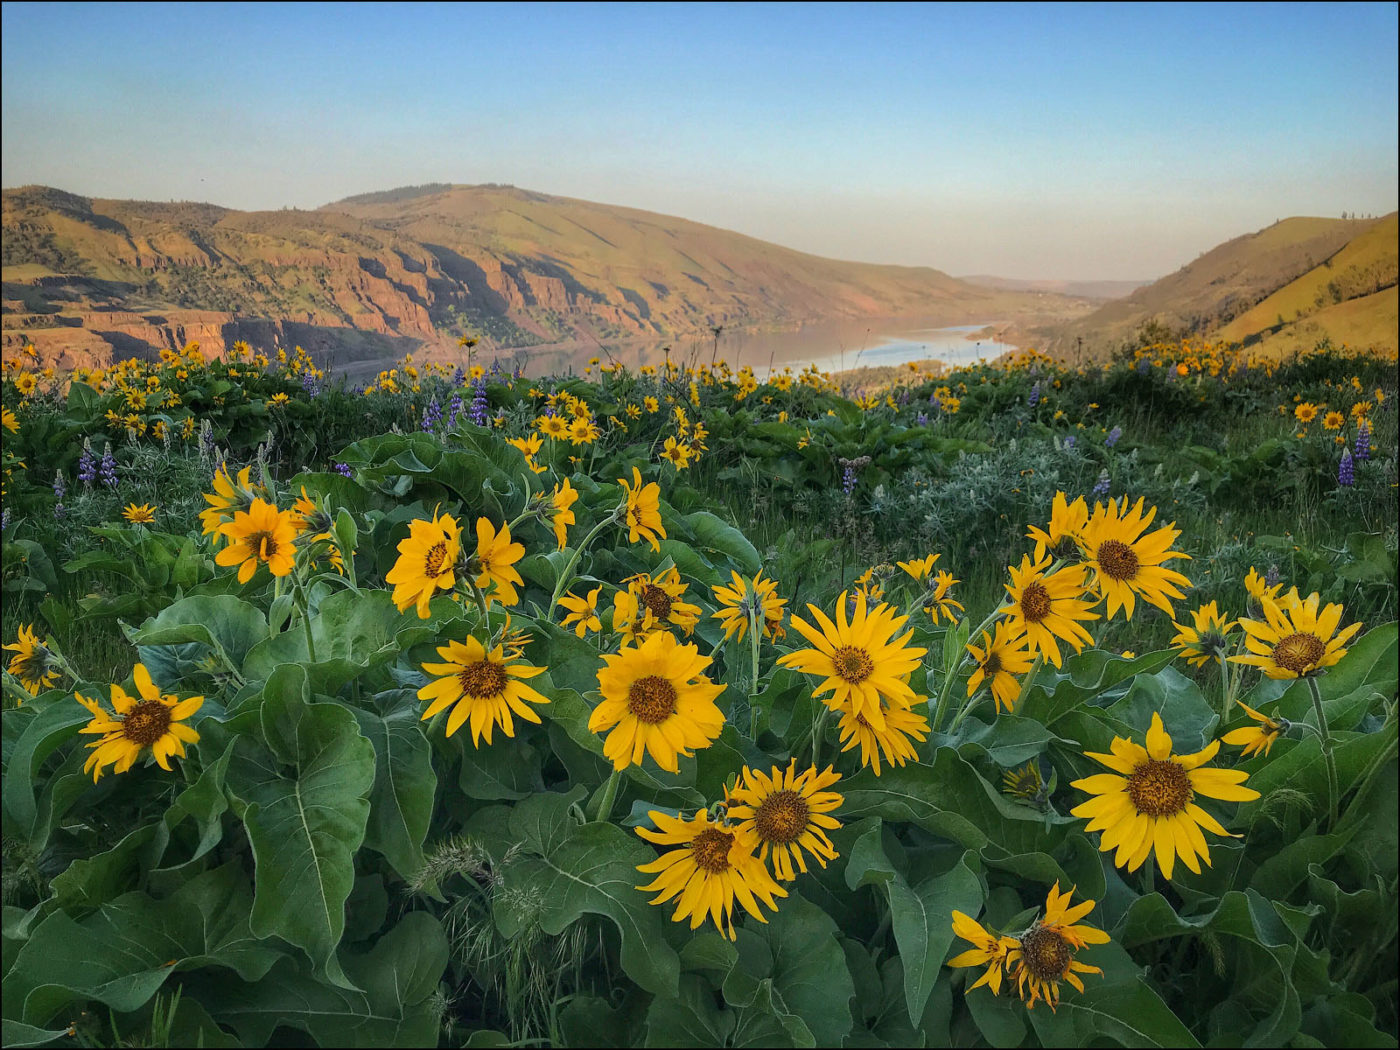 Balsamroot at Tom McCall Preserve, Rowena, Oregon, in the Columbia River Gorge.